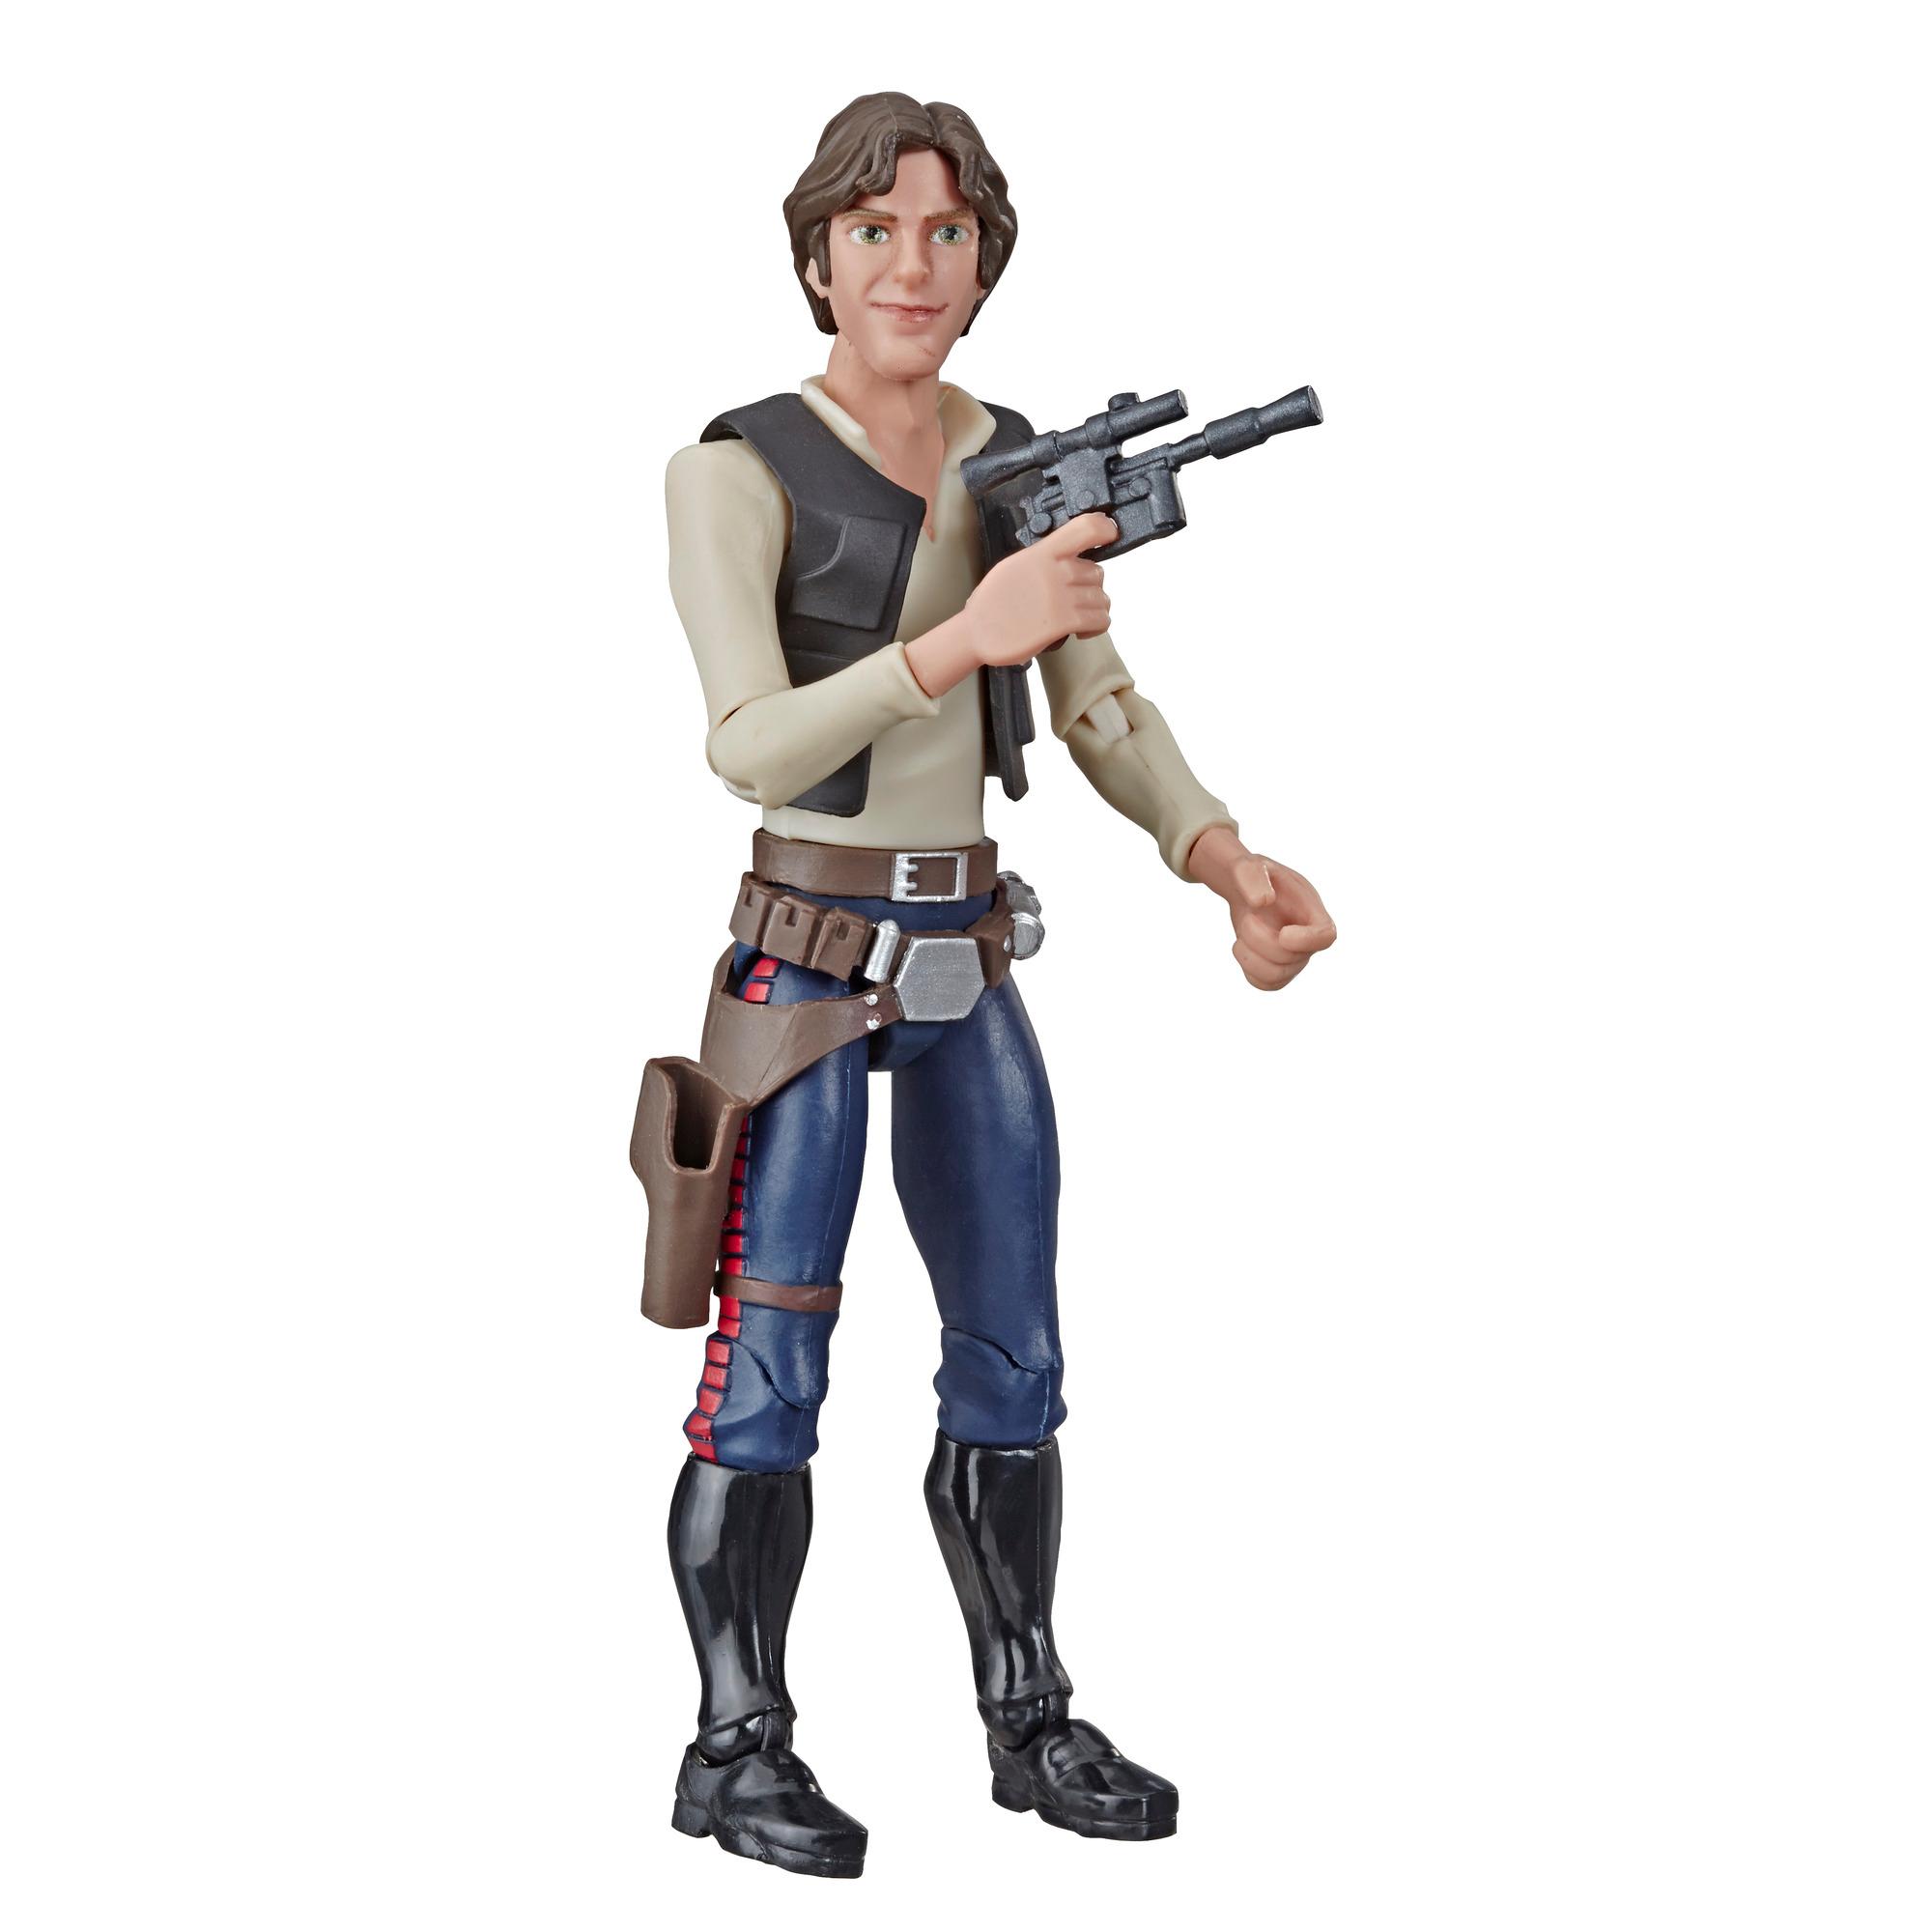 Hasbro Star Wars The Black Series Han Solo 09 Action Figure for sale online 